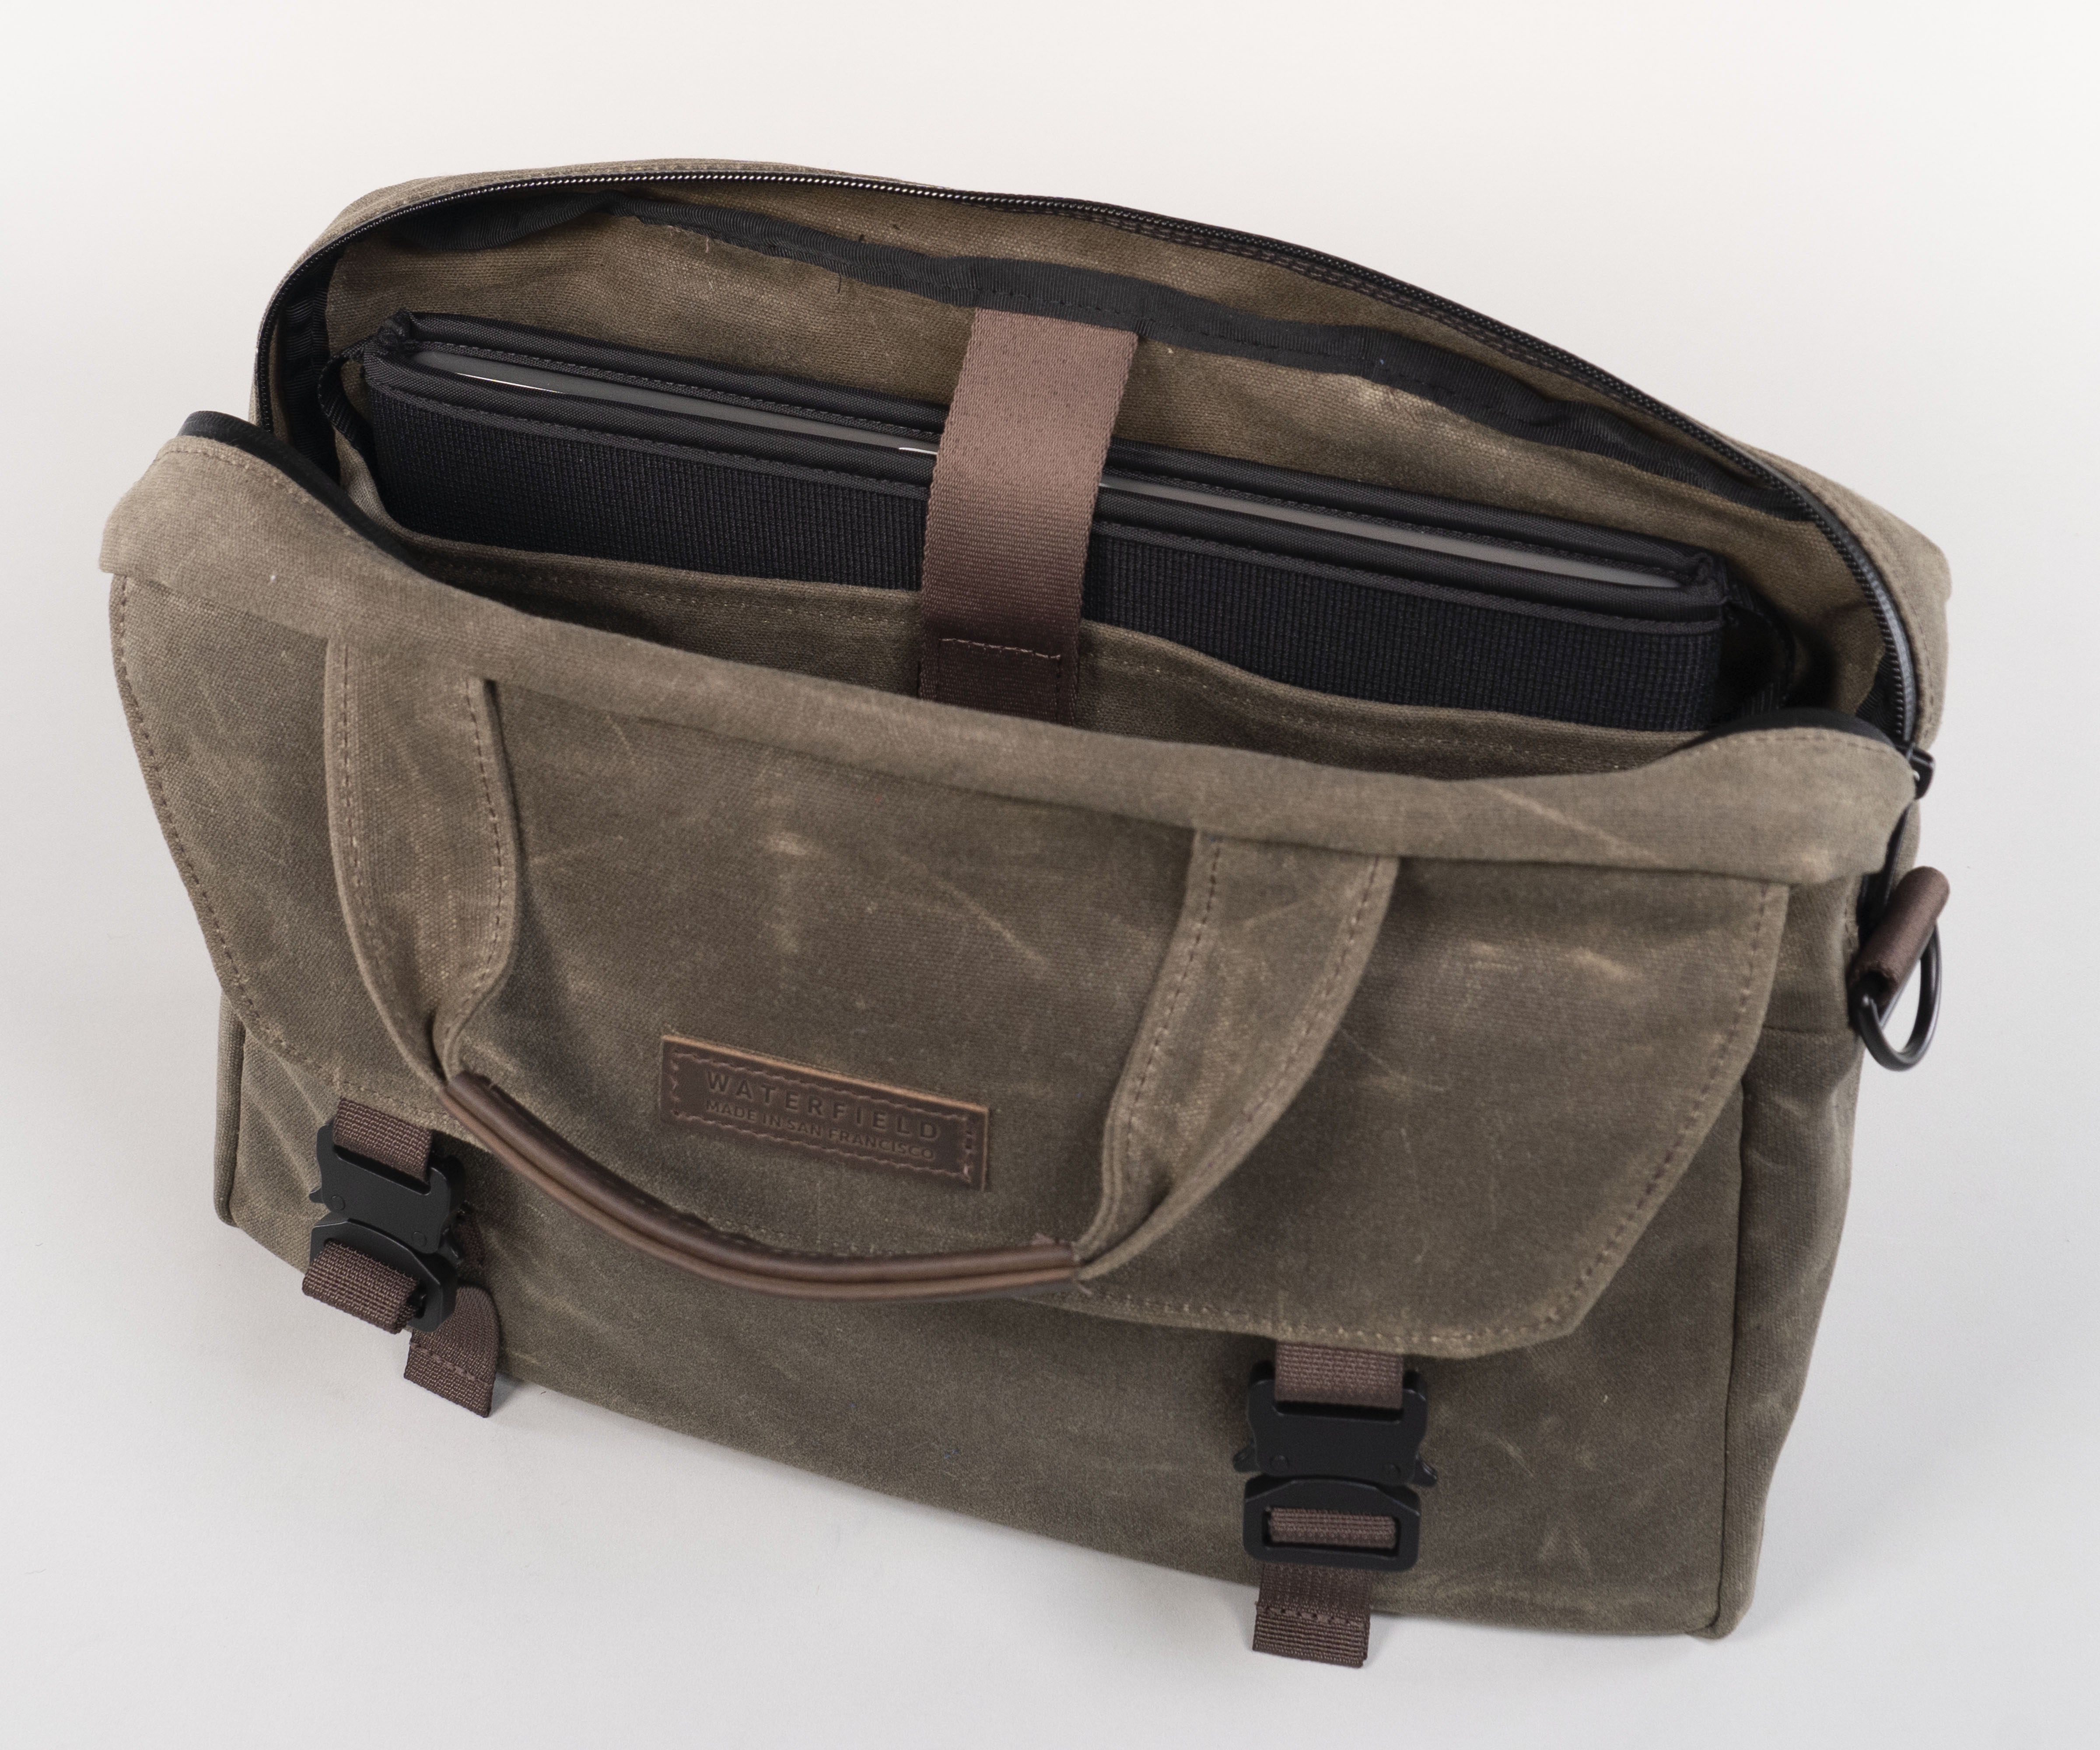 Vitesse with the WaterField Neo Sleeve in the laptop pocket